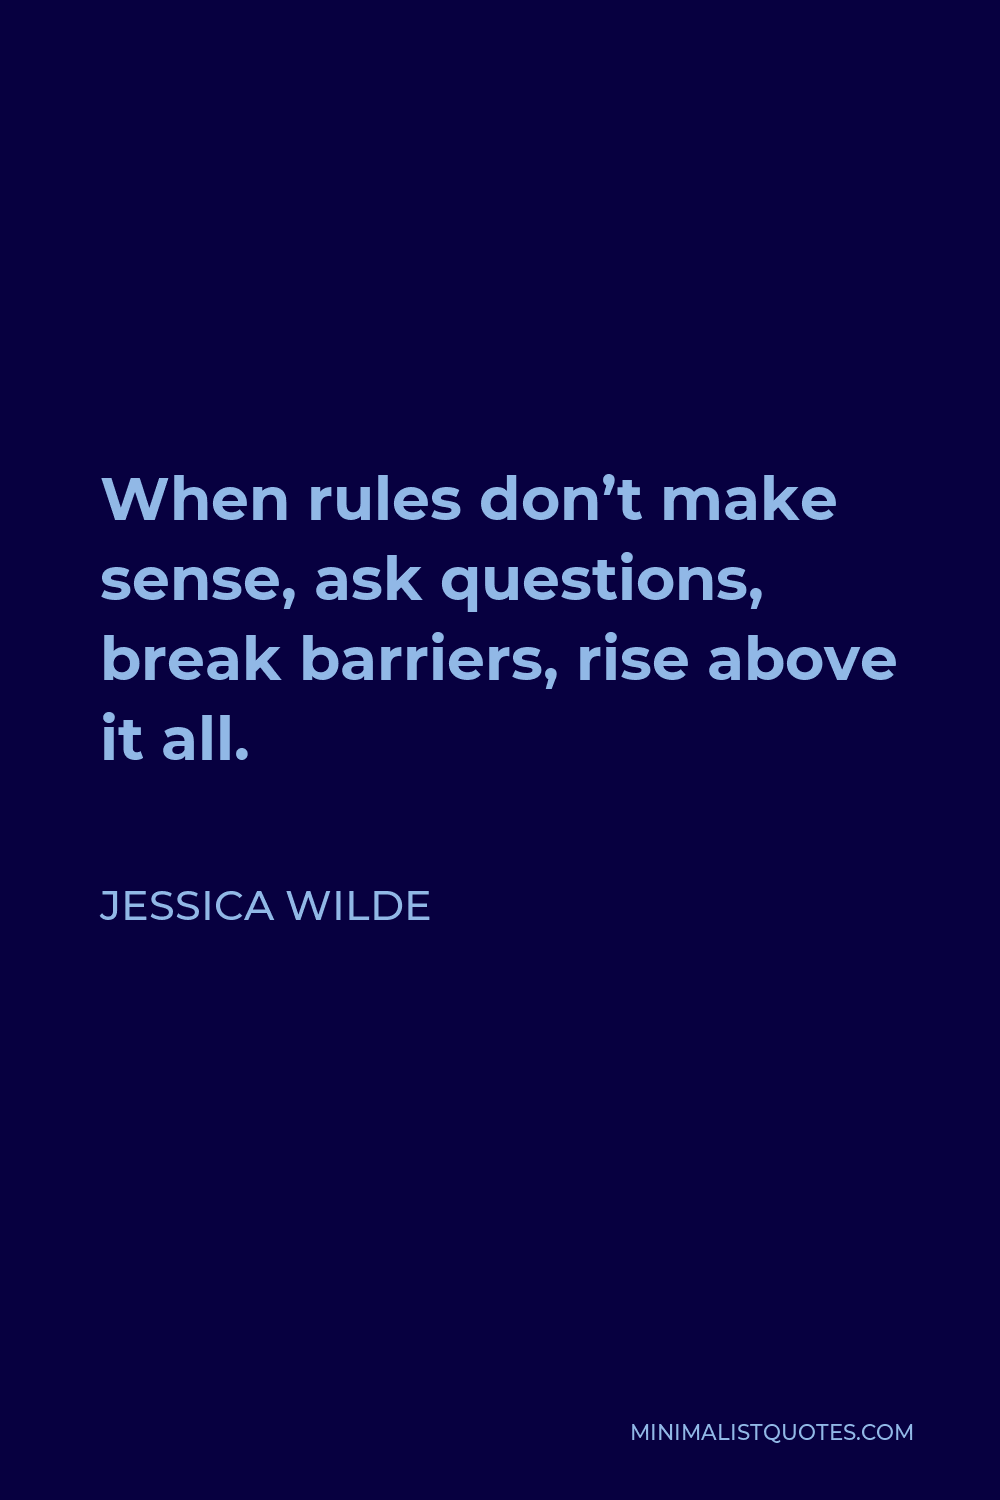 Jessica Wilde Quote - When rules don’t make sense, ask questions, break barriers, rise above it all.